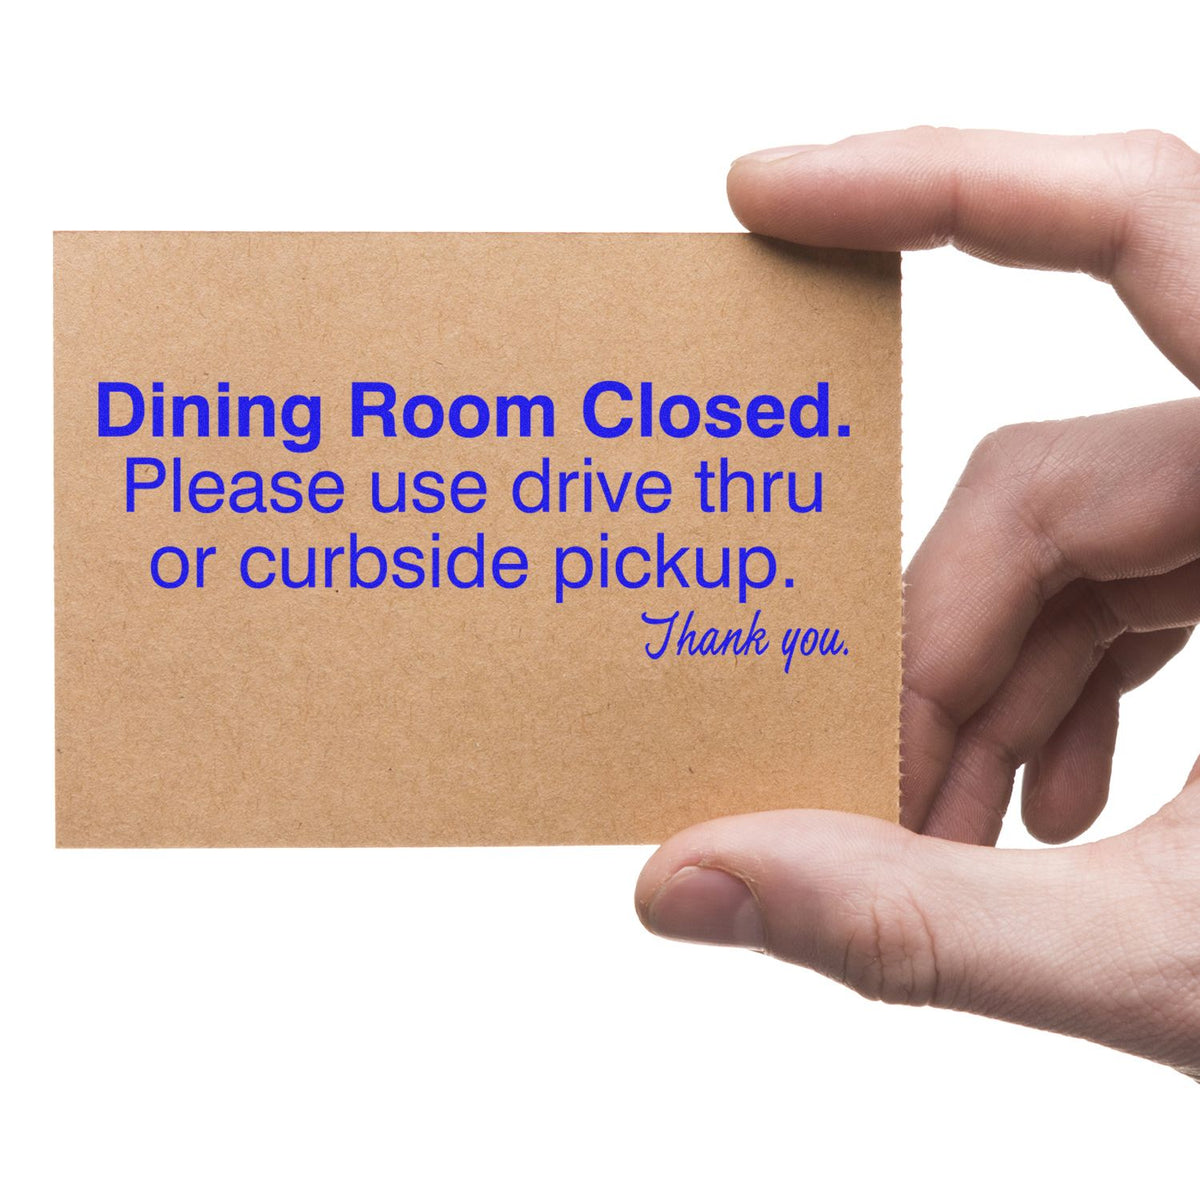 Self-Inking Dining Room Closed Stamp In Use Photo